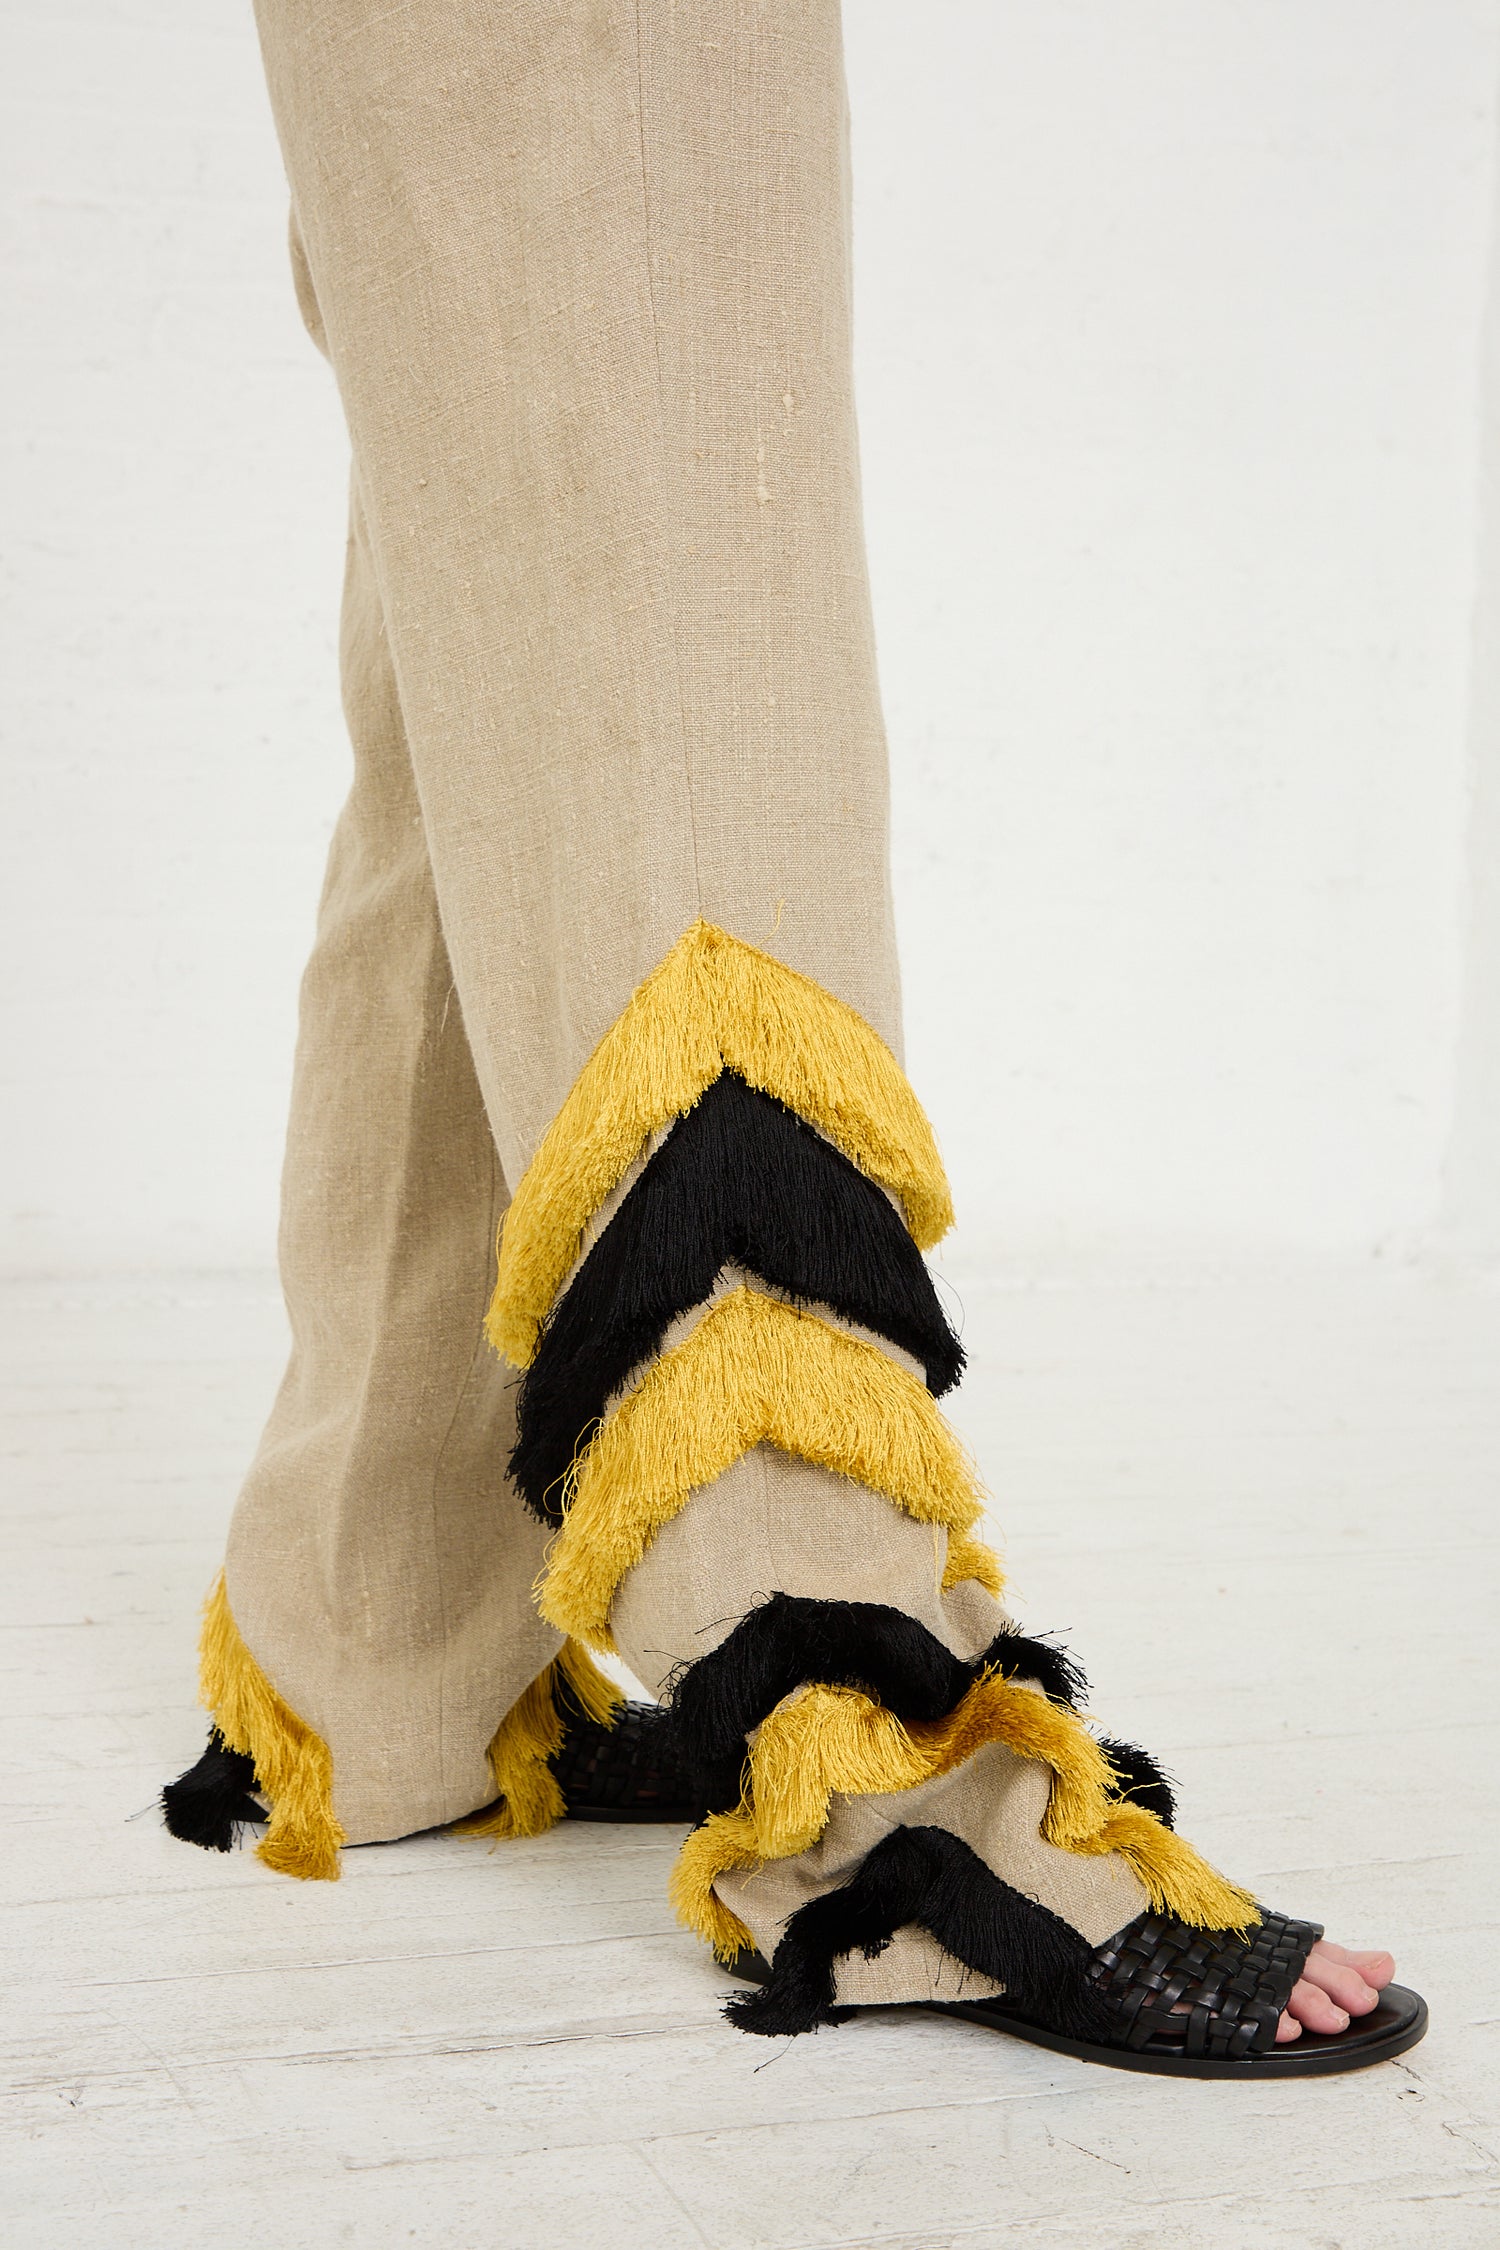 A person wearing the Rachel Comey Ditto Pant in Natural and a distinctive black and yellow fringed shoe from the Rachel Comey design.